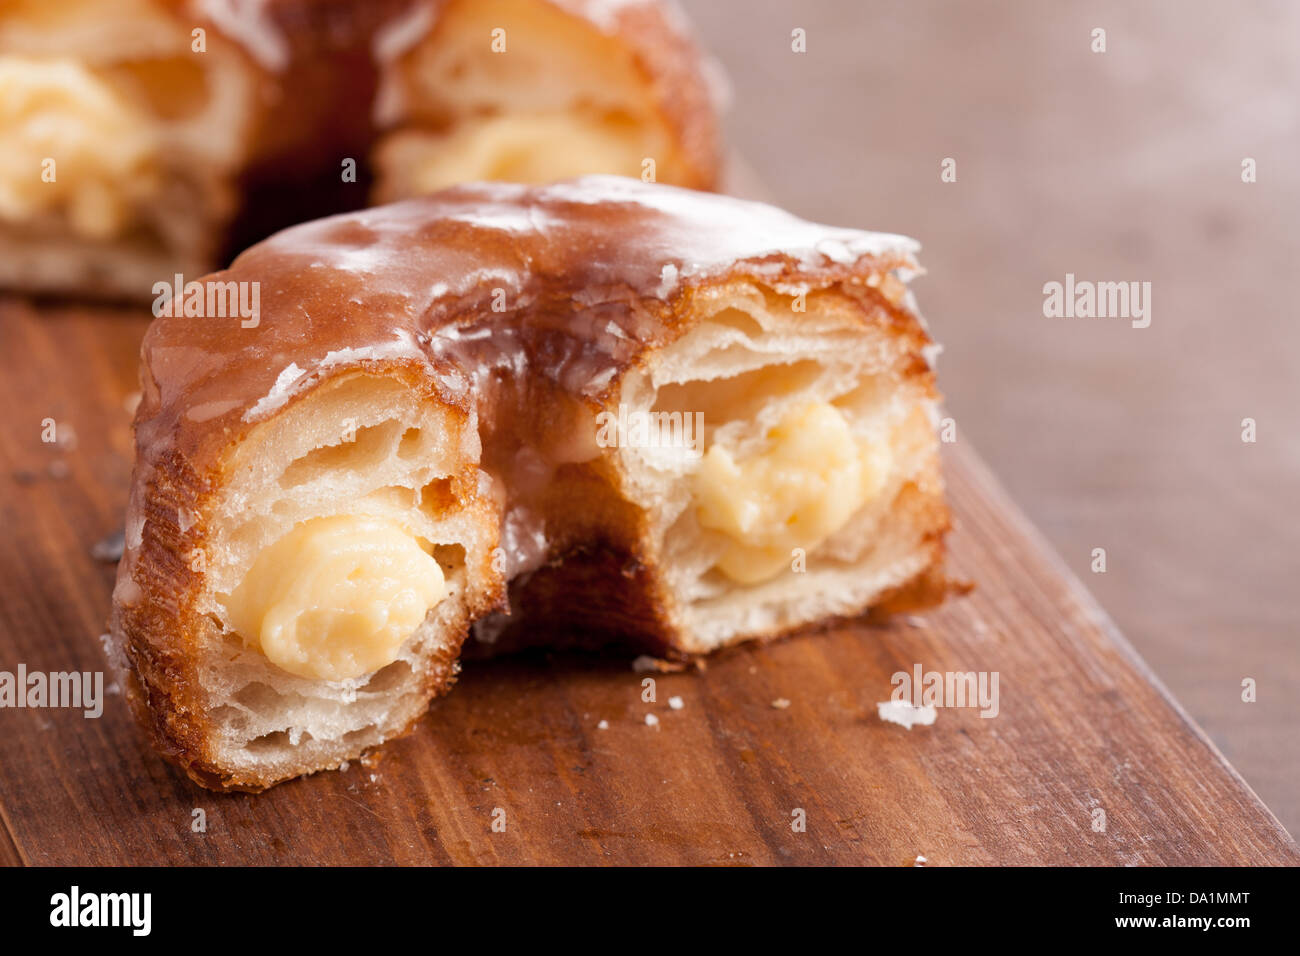 Cream croissant and doughnut mixture on a wooden table Stock Photo